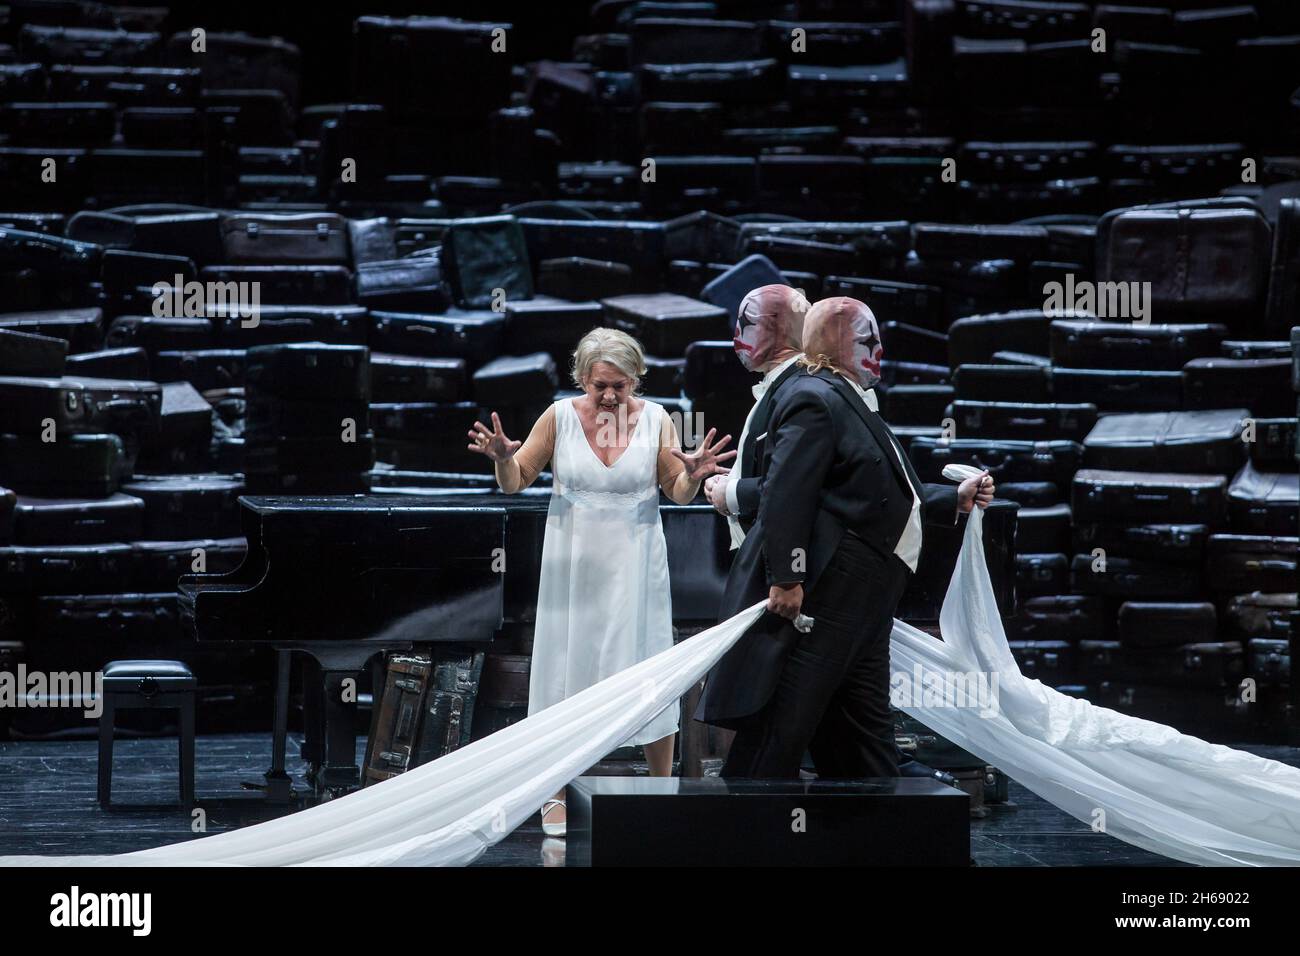 Berlin, Germany. 14th Oct, 2021. Nina Stemme as Brünnhilde, Thomas Lehman (M) as Gunther and Clay Hille as Siegfried stand on stage during a rehearsal for the Wagner opera 'Götterdämmerung' at the Deutsche Oper Berlin. Credit: Nina Hansch/dpa/Alamy Live News Stock Photo